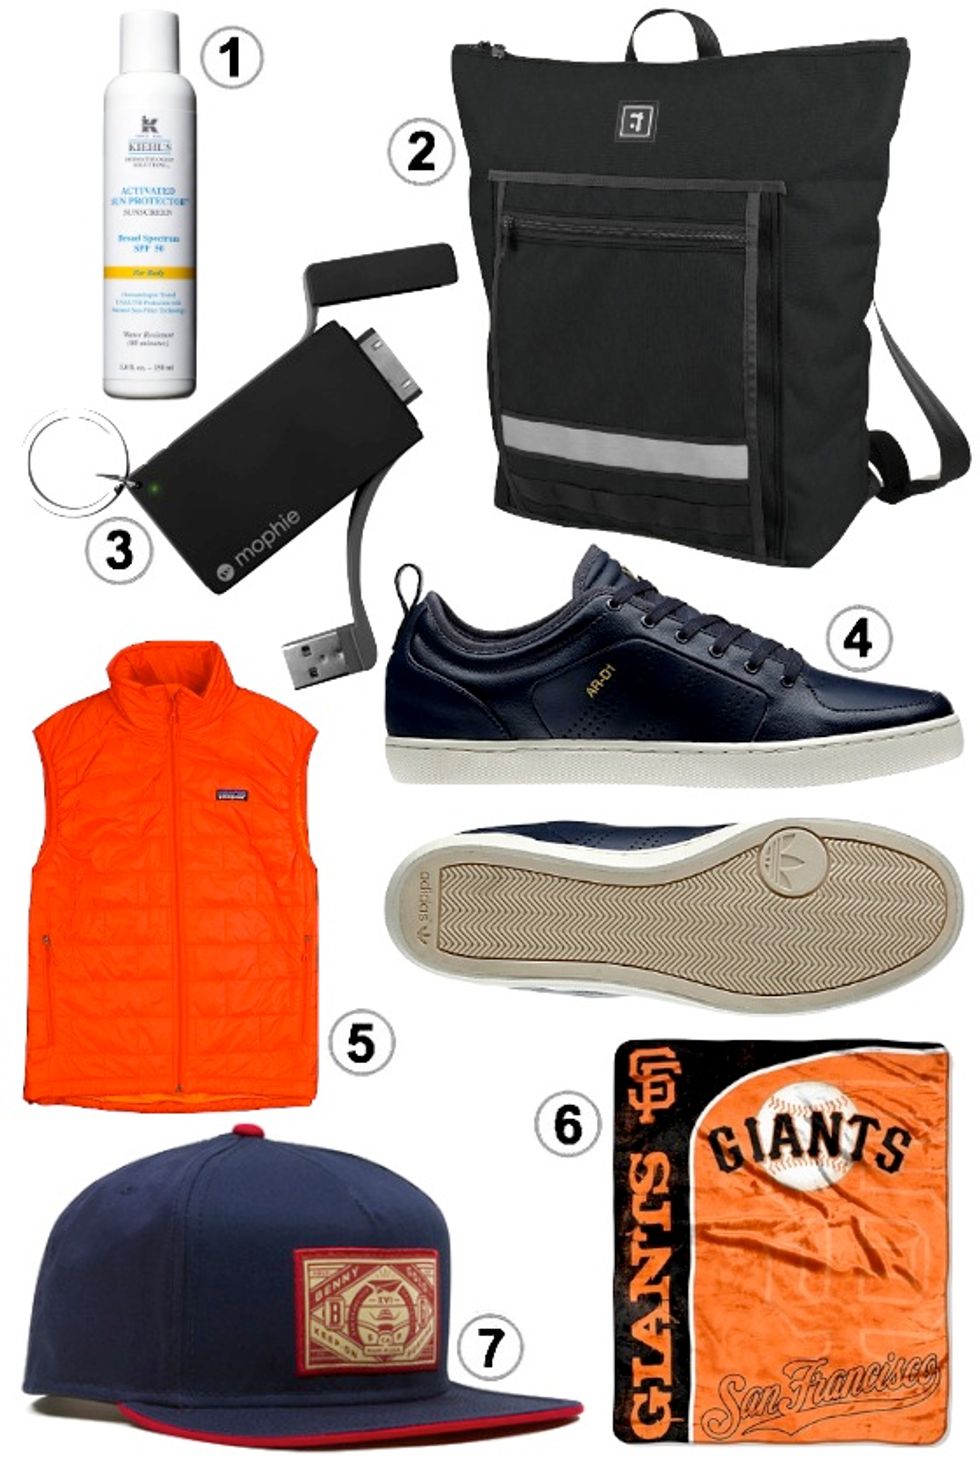 Look of the Week: Men's Essentials for the Treasure Island Music Festival